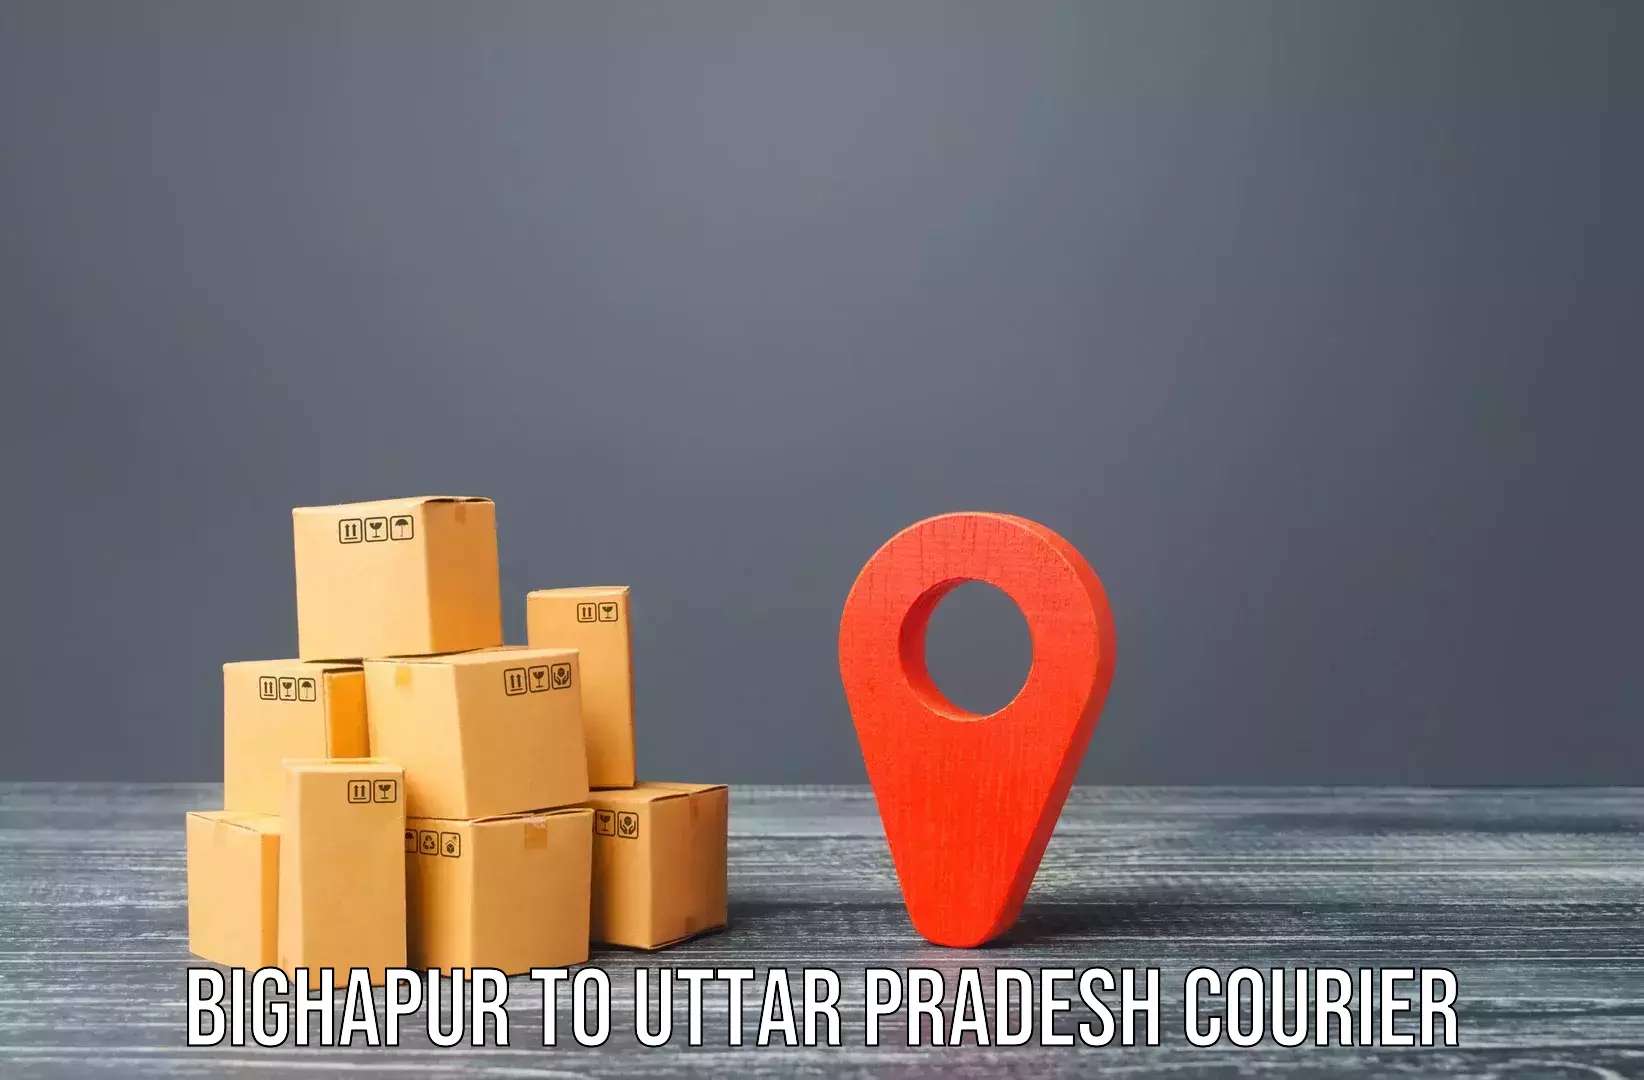 Furniture delivery service Bighapur to Pilibhit